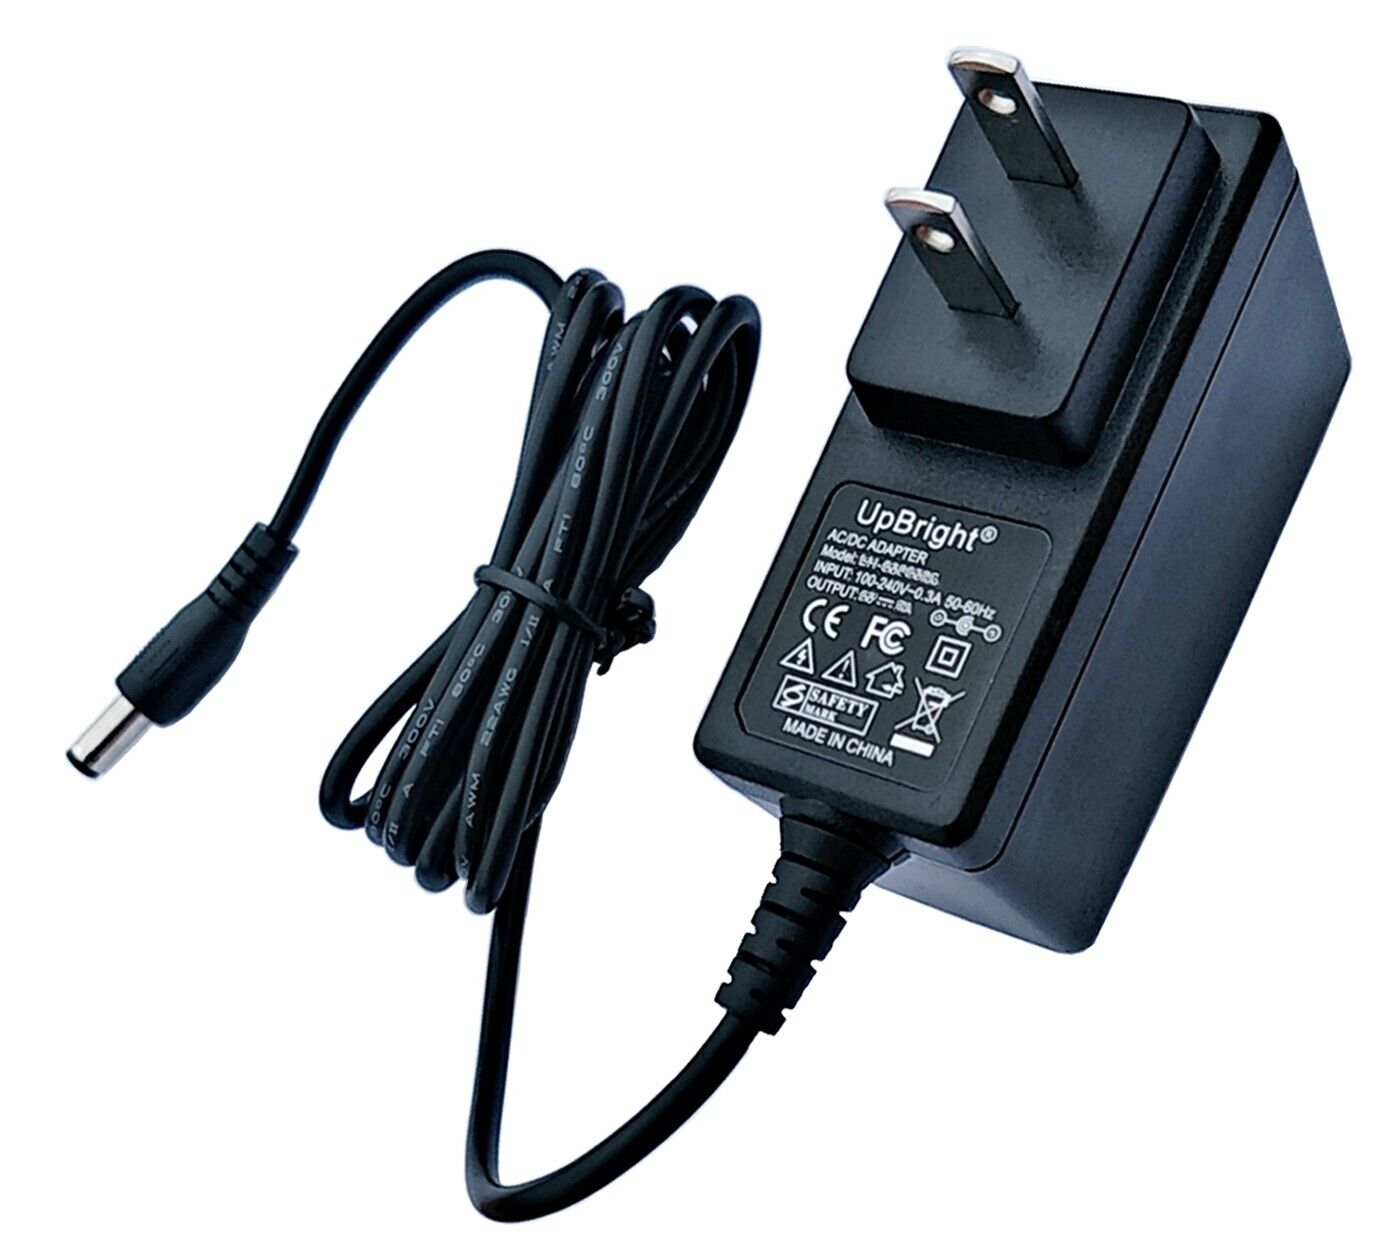 AC Adapter For AC Infinity AIRCOM S6 S7 S8 S9 S10 T8 T9 T10 Cooling Fan System